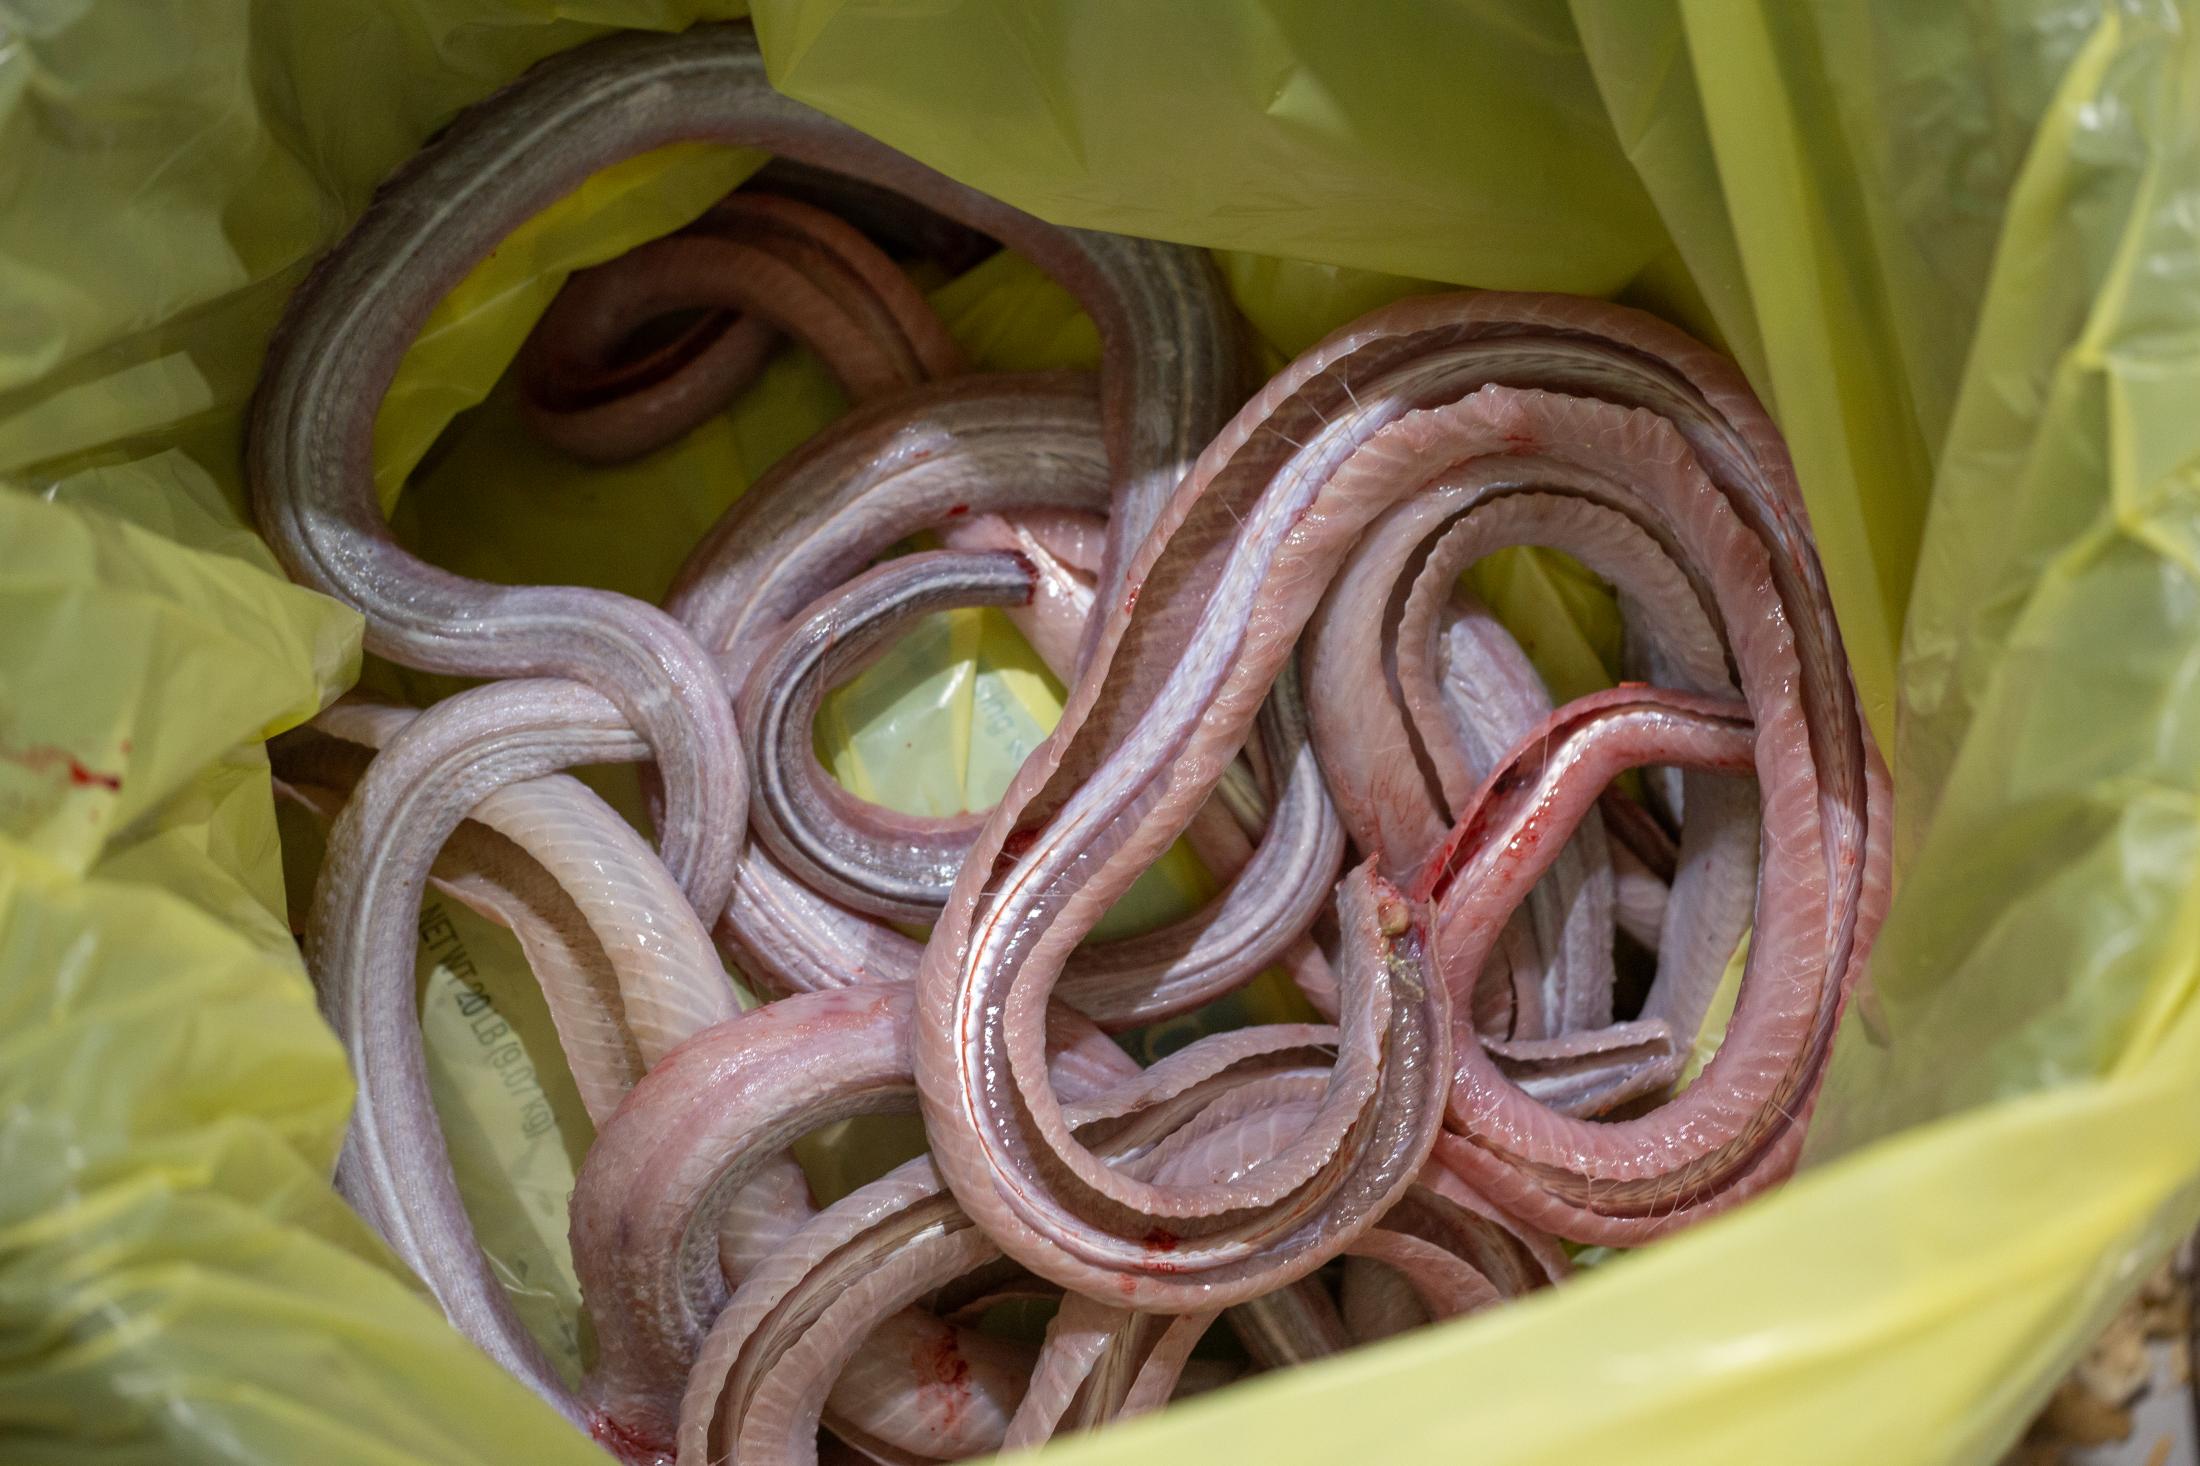 Headless and skinless snakes are placed in a yellow-colored trash bag that goes to a kitchen,...